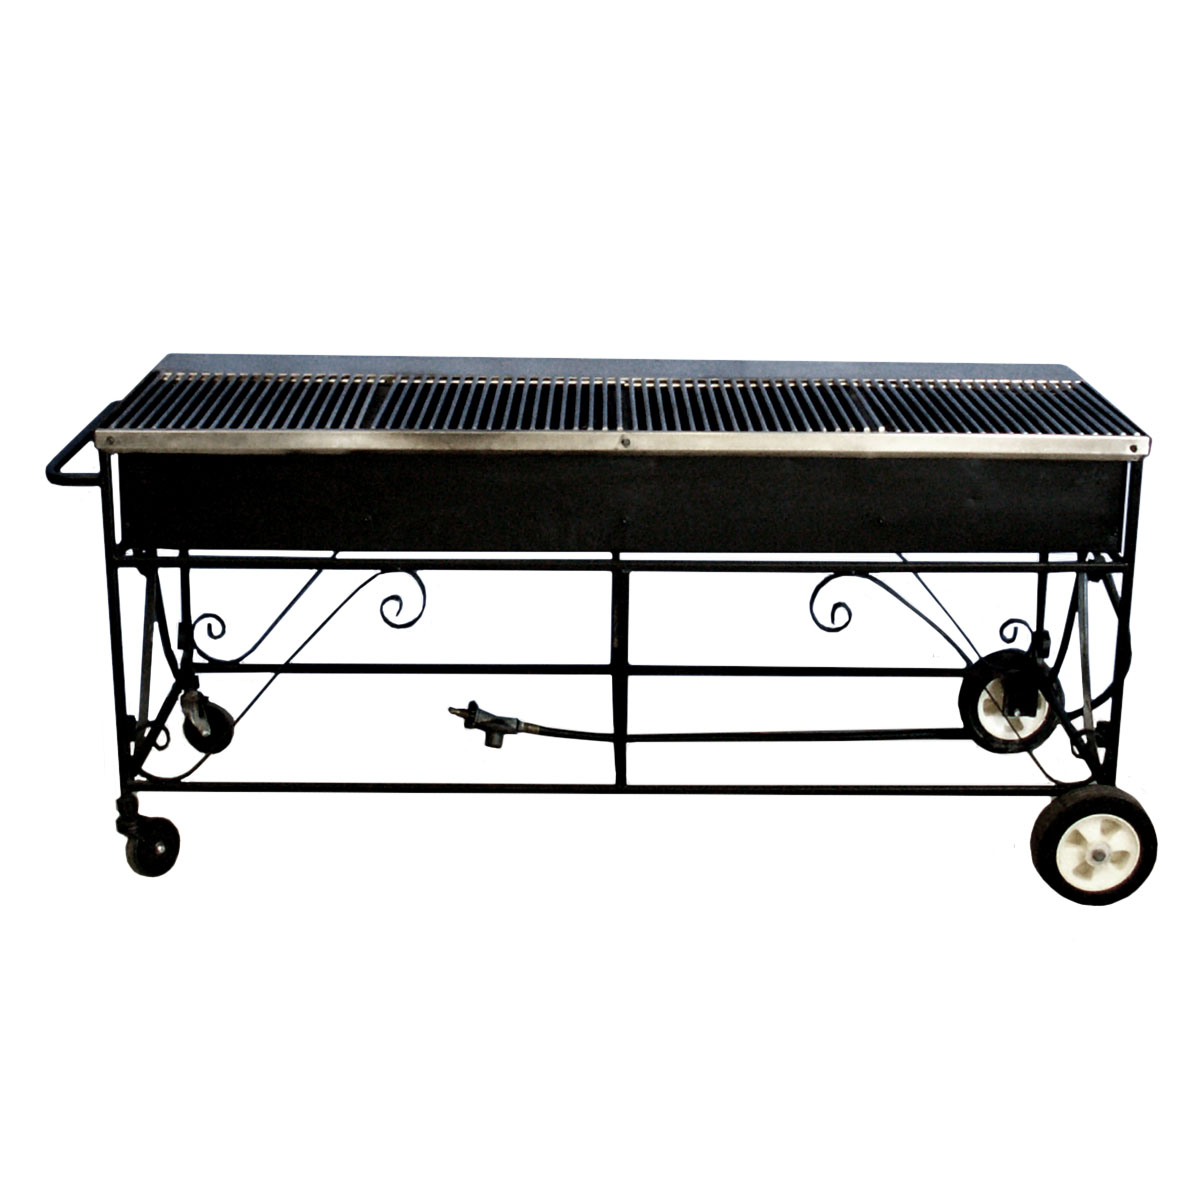 Grills, Griddles & Cookers